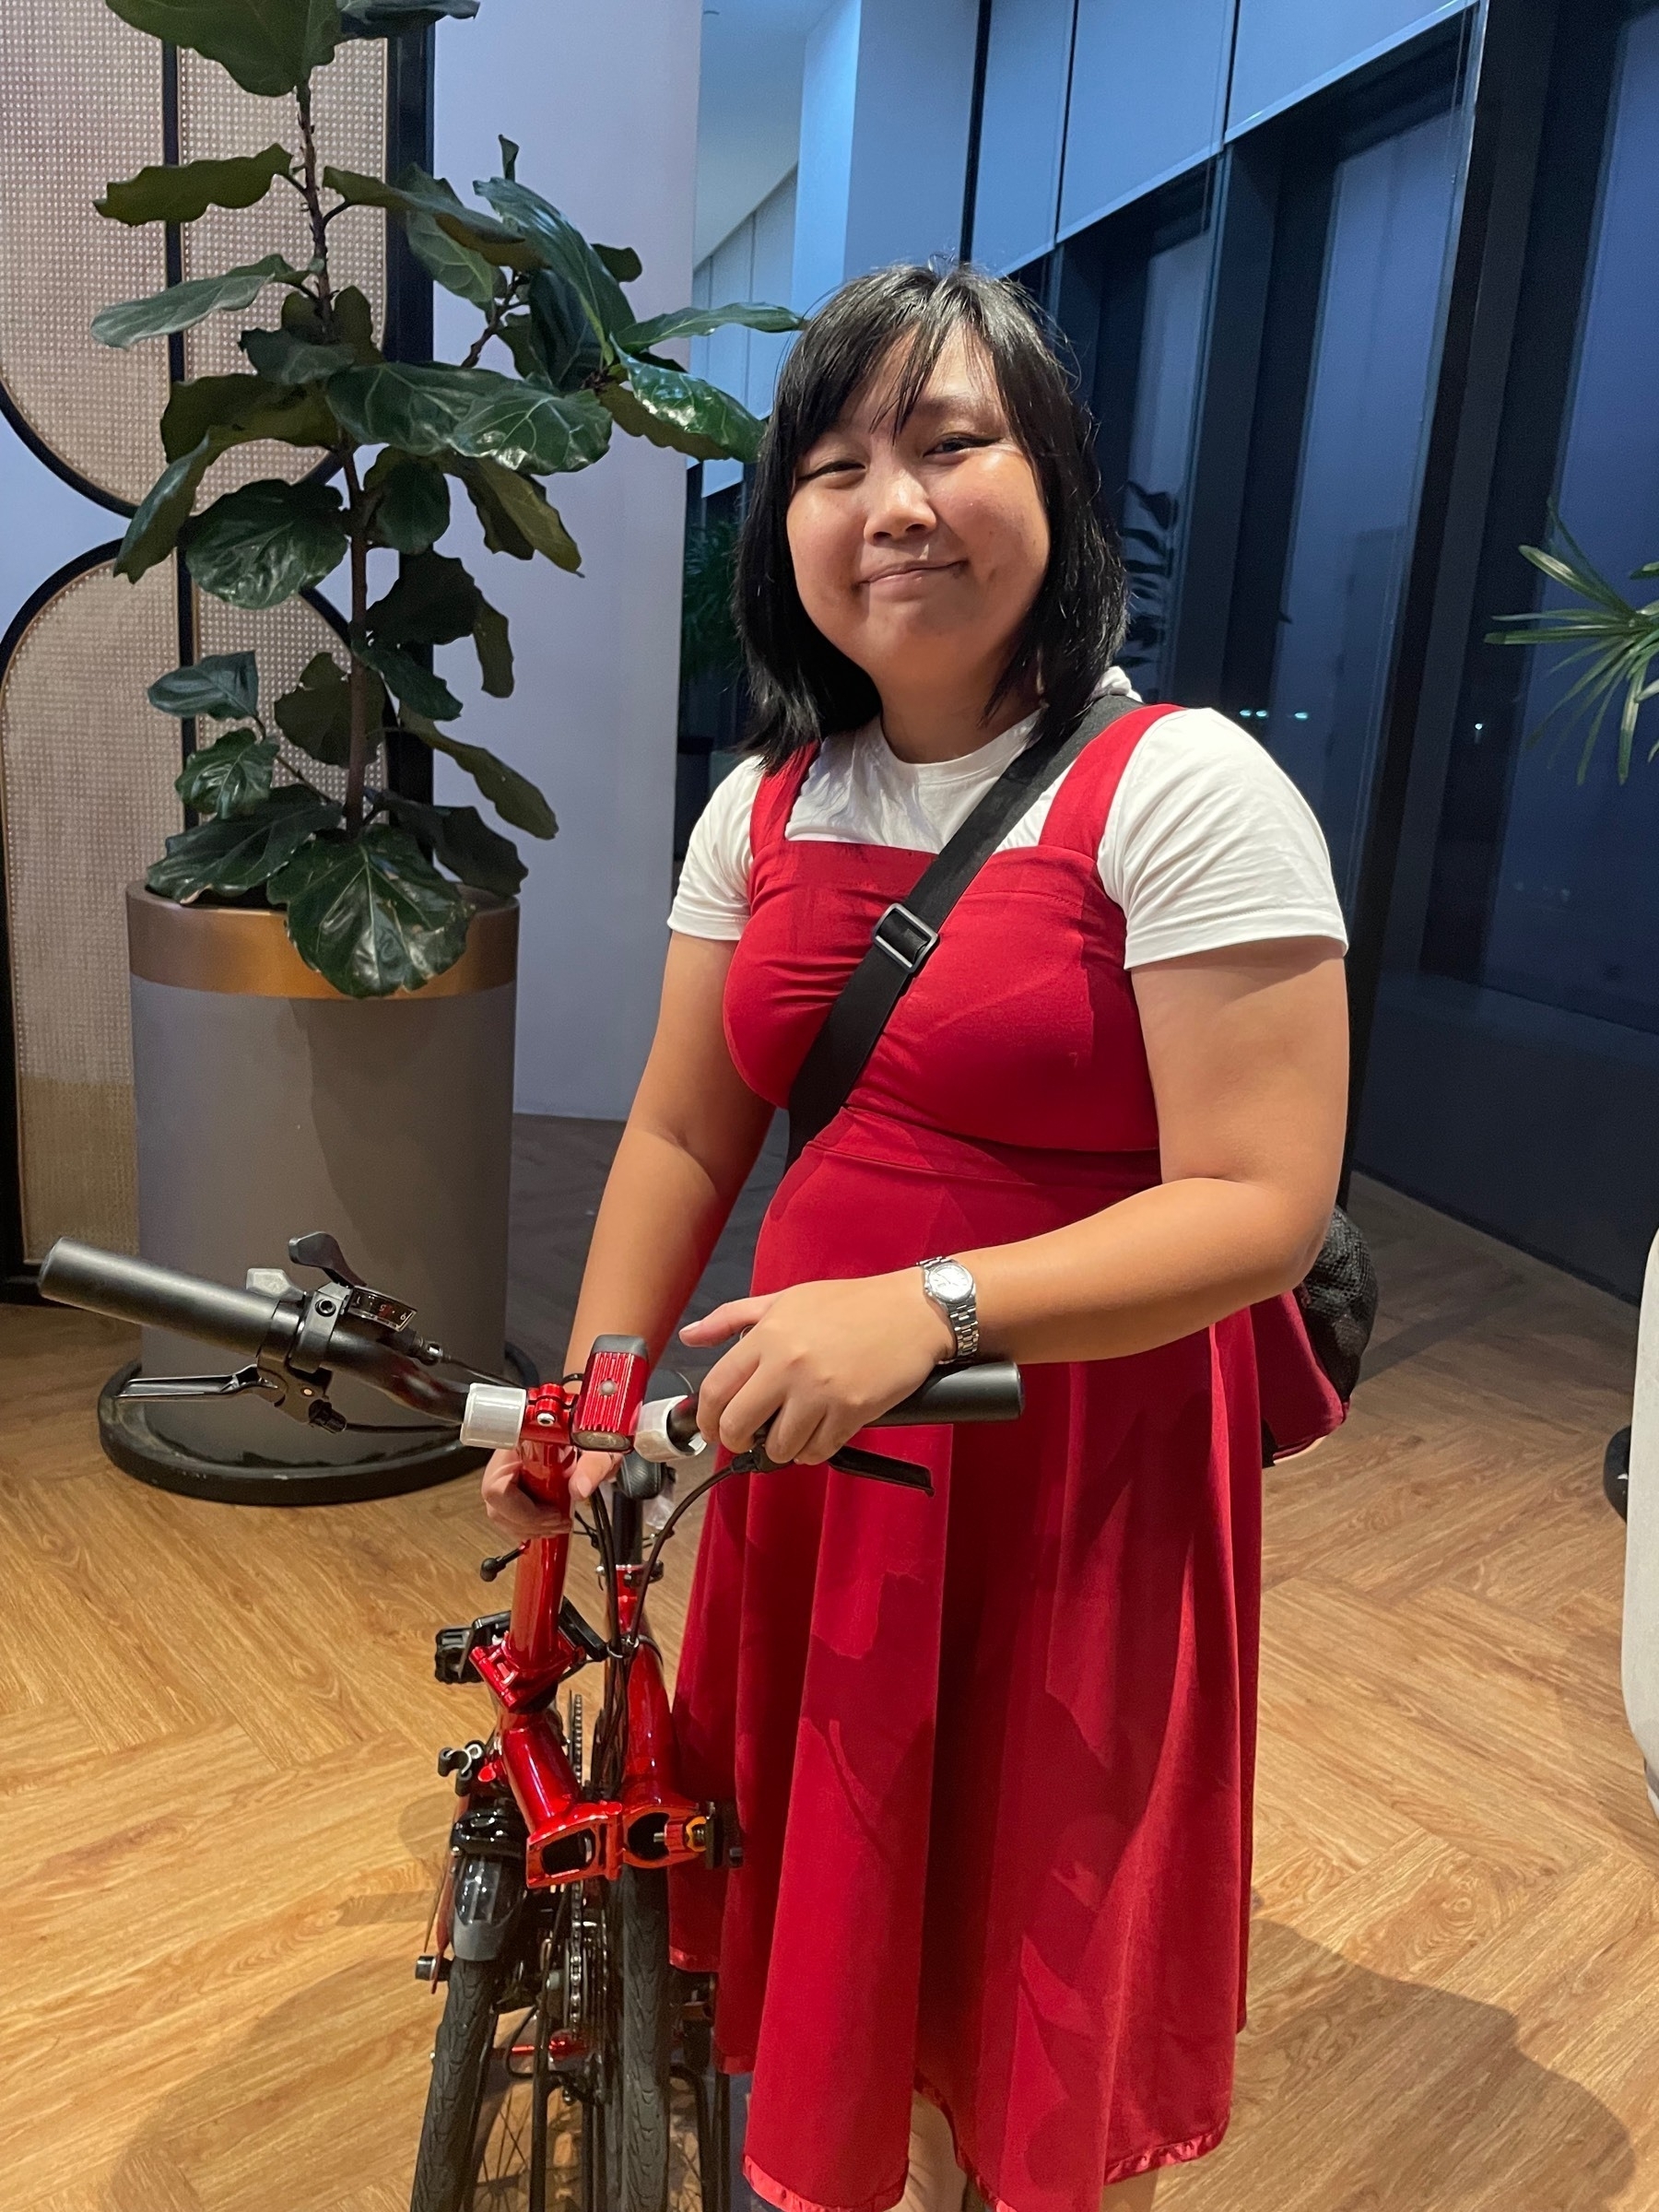 Chi posing with her red folded trifold bike. She is wearing a red long dress with a white undershirt, and slung on her shoulder is her red front bike bag. She is at a shared office space, with some indoor plants seen behind her.